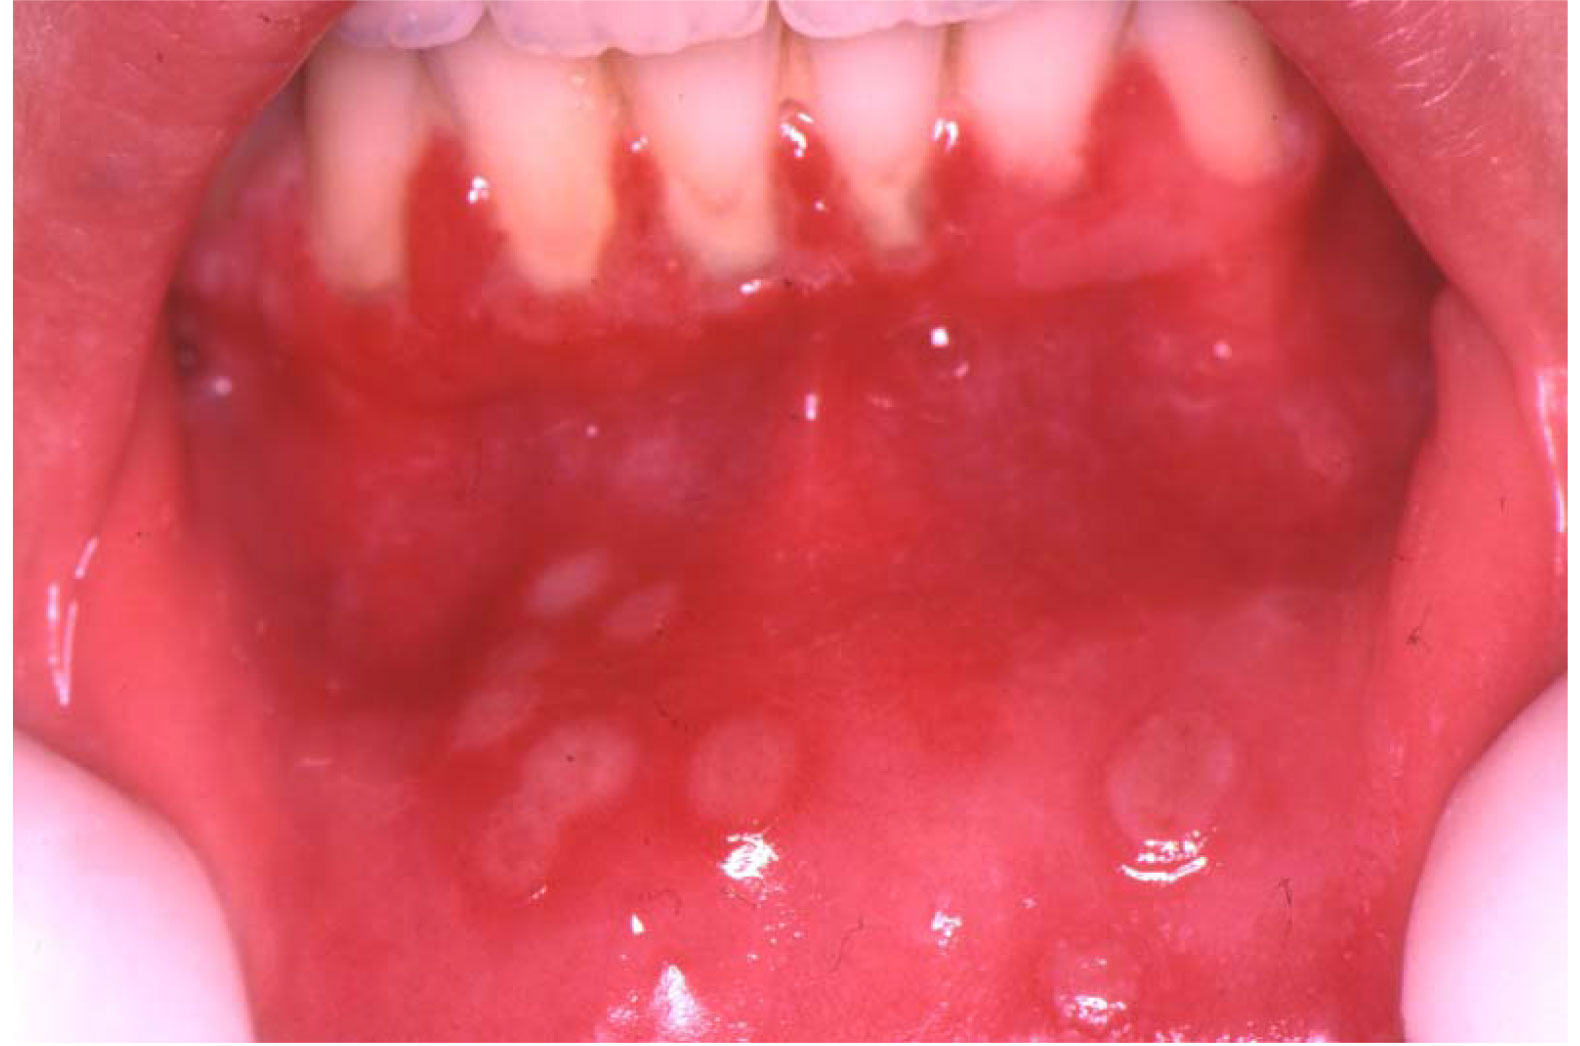 clinical presentation of oral herpes